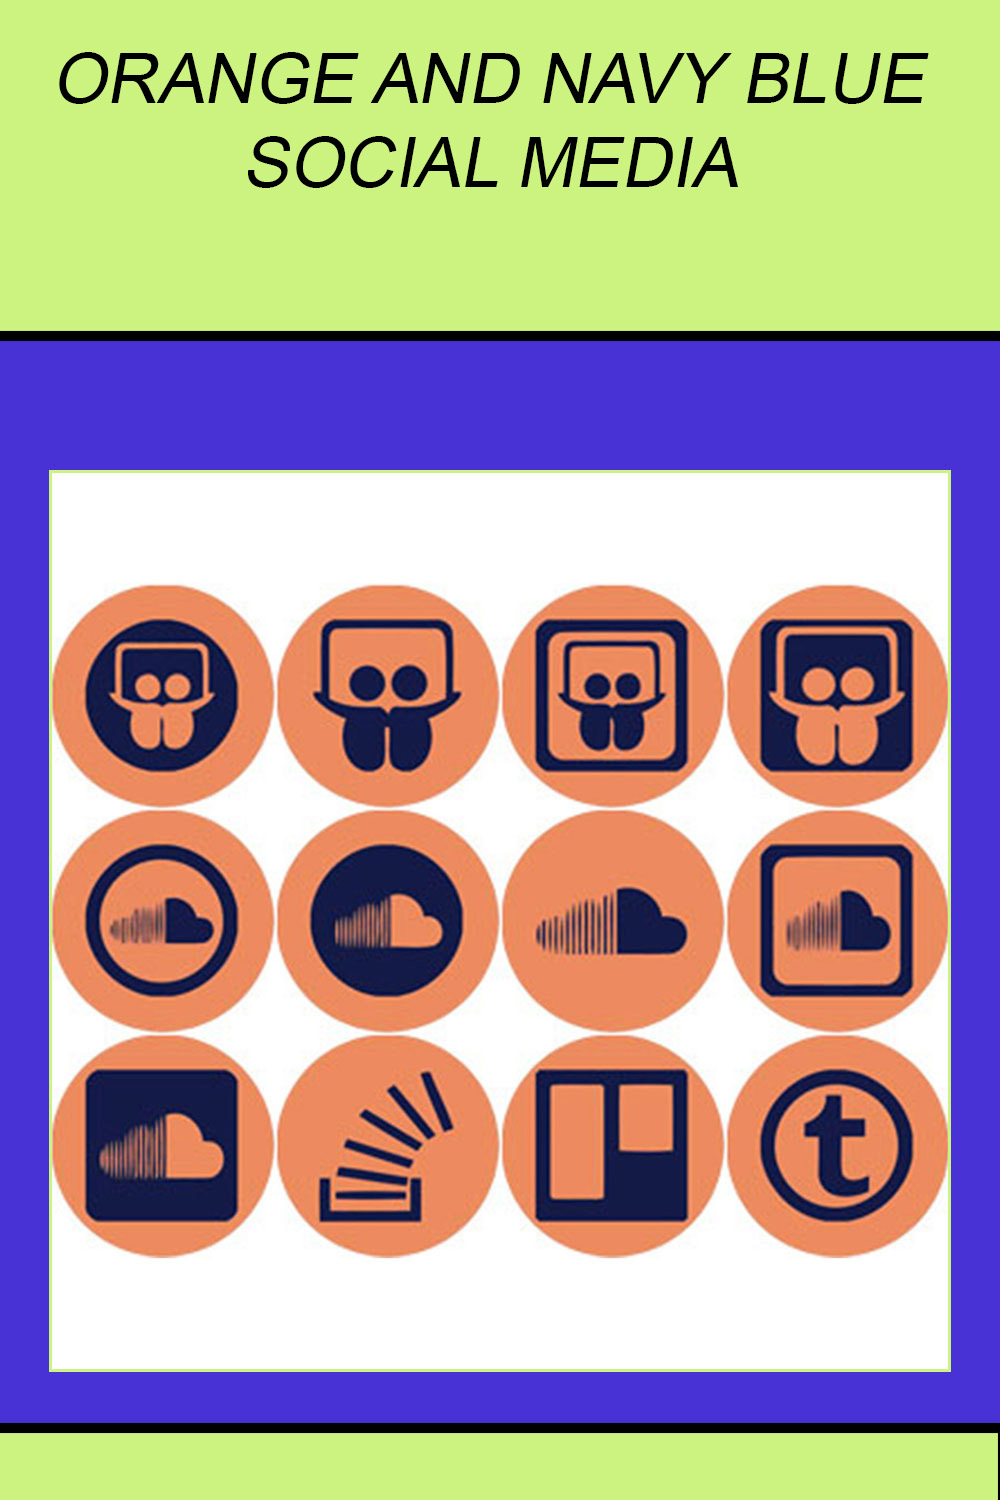 ORANGE AND NAVY BLUE SOCIAL MEDIA ROUND ICONS pinterest preview image.